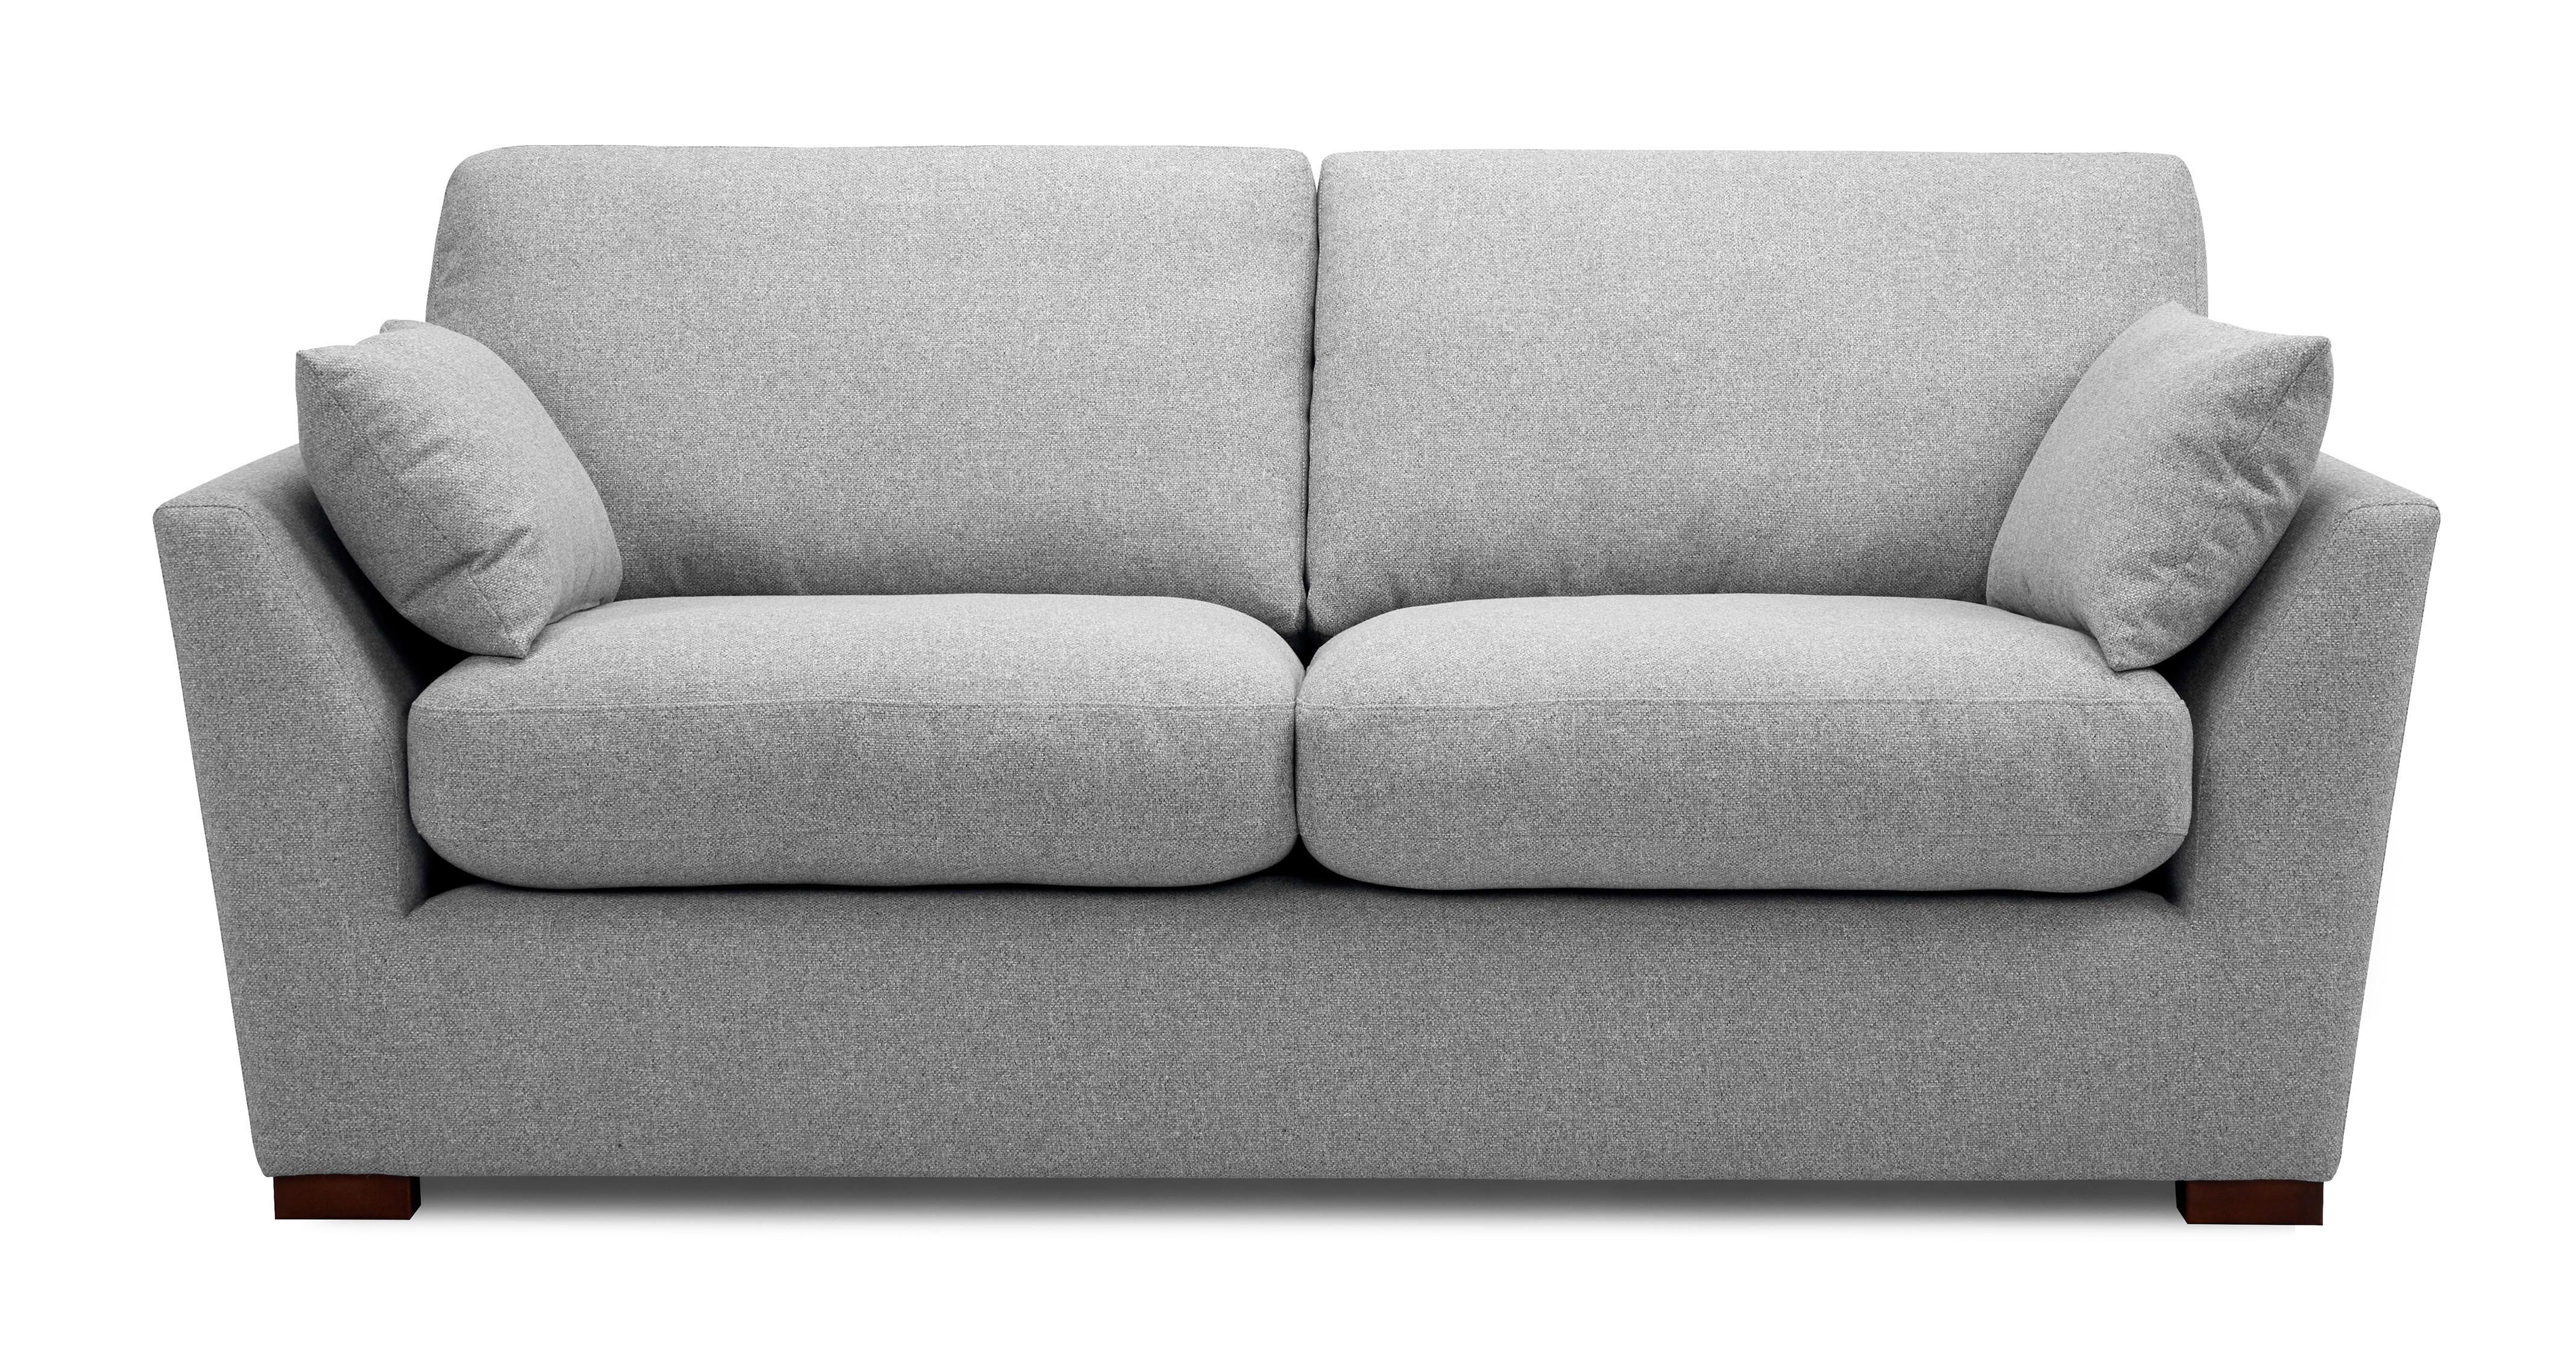 Sofas | Fabric Couches, Settees Sofa Sets |